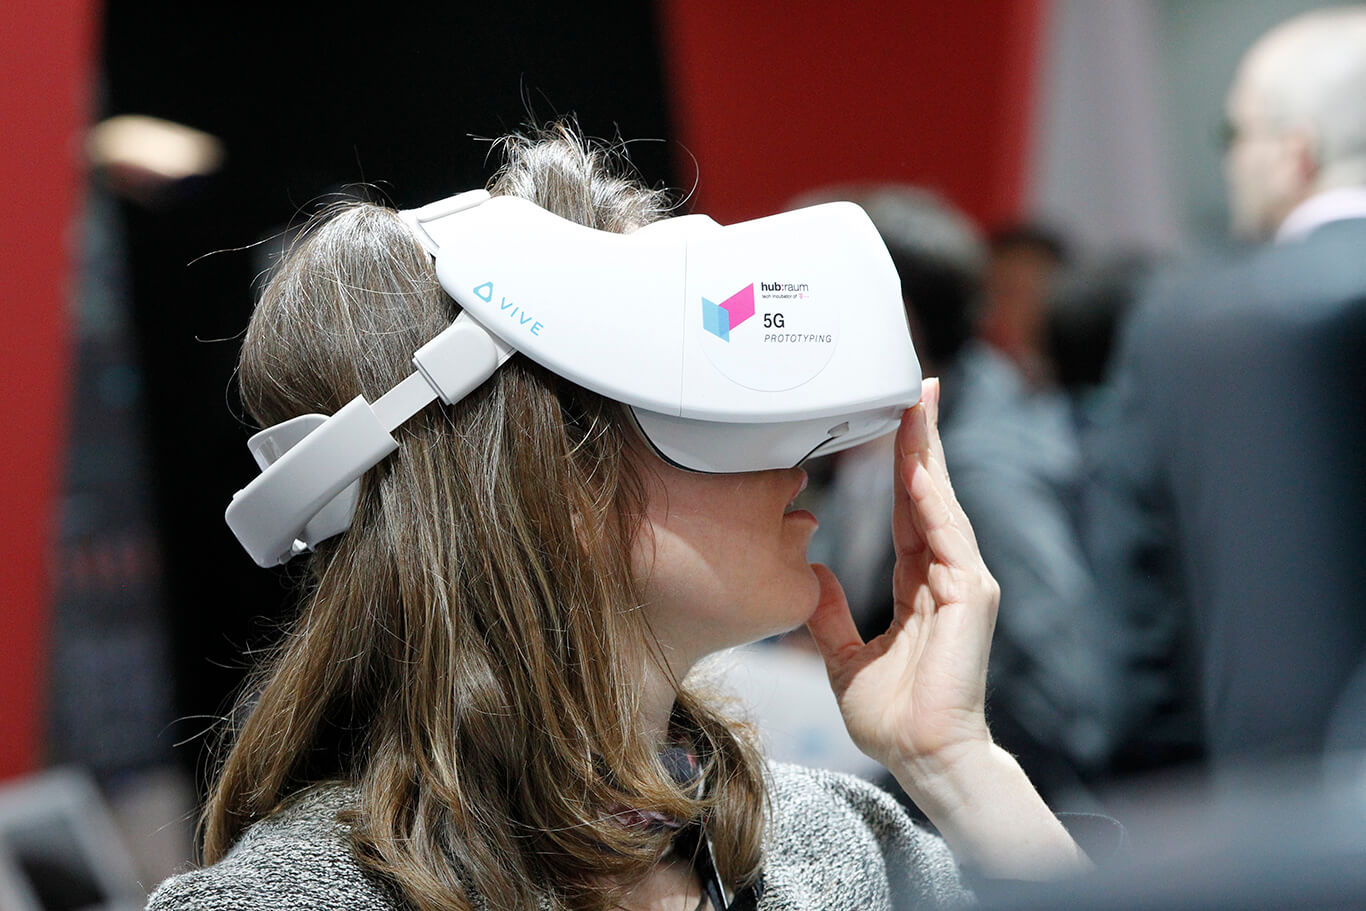 The latest VR technologies at Mobile World Congress 2019